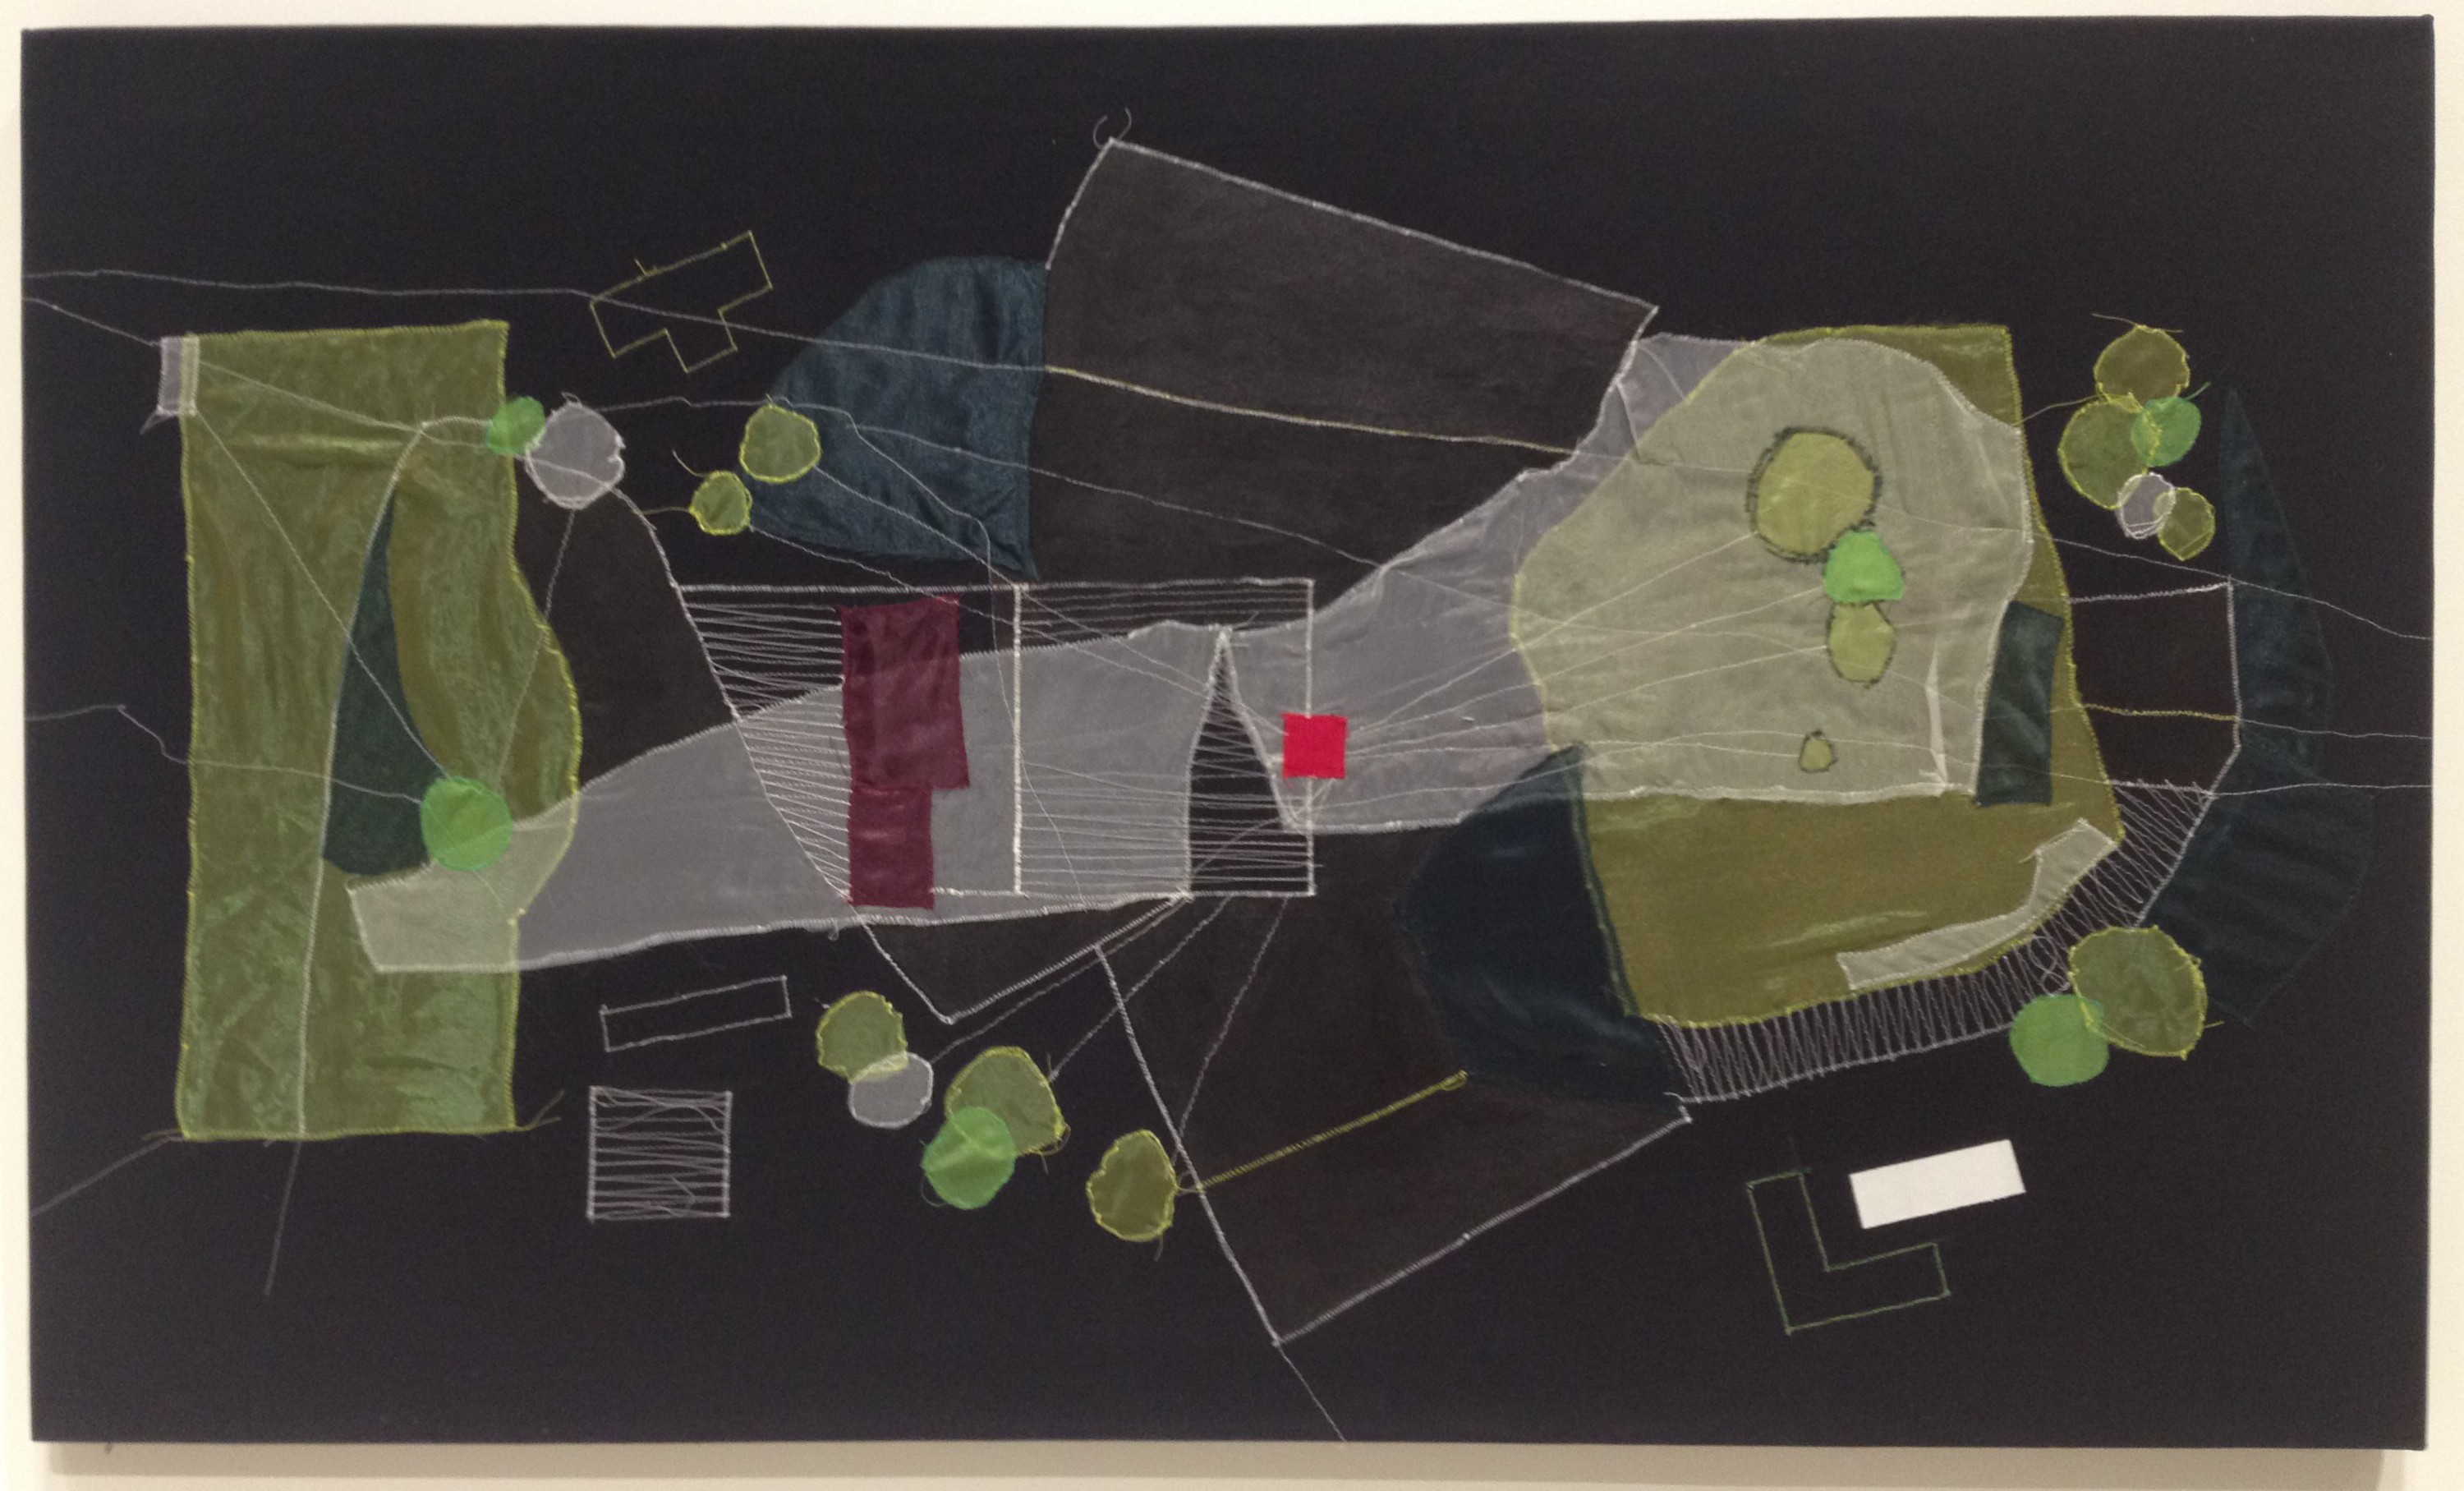 Christine Gedeon, OSH, Brooklyn (Plot re-visualized), Fabric, thread and paint on raw black canvas, 2012. The artist investigates built environment as it relates to collective memory, suggests an organically morphing city plan.